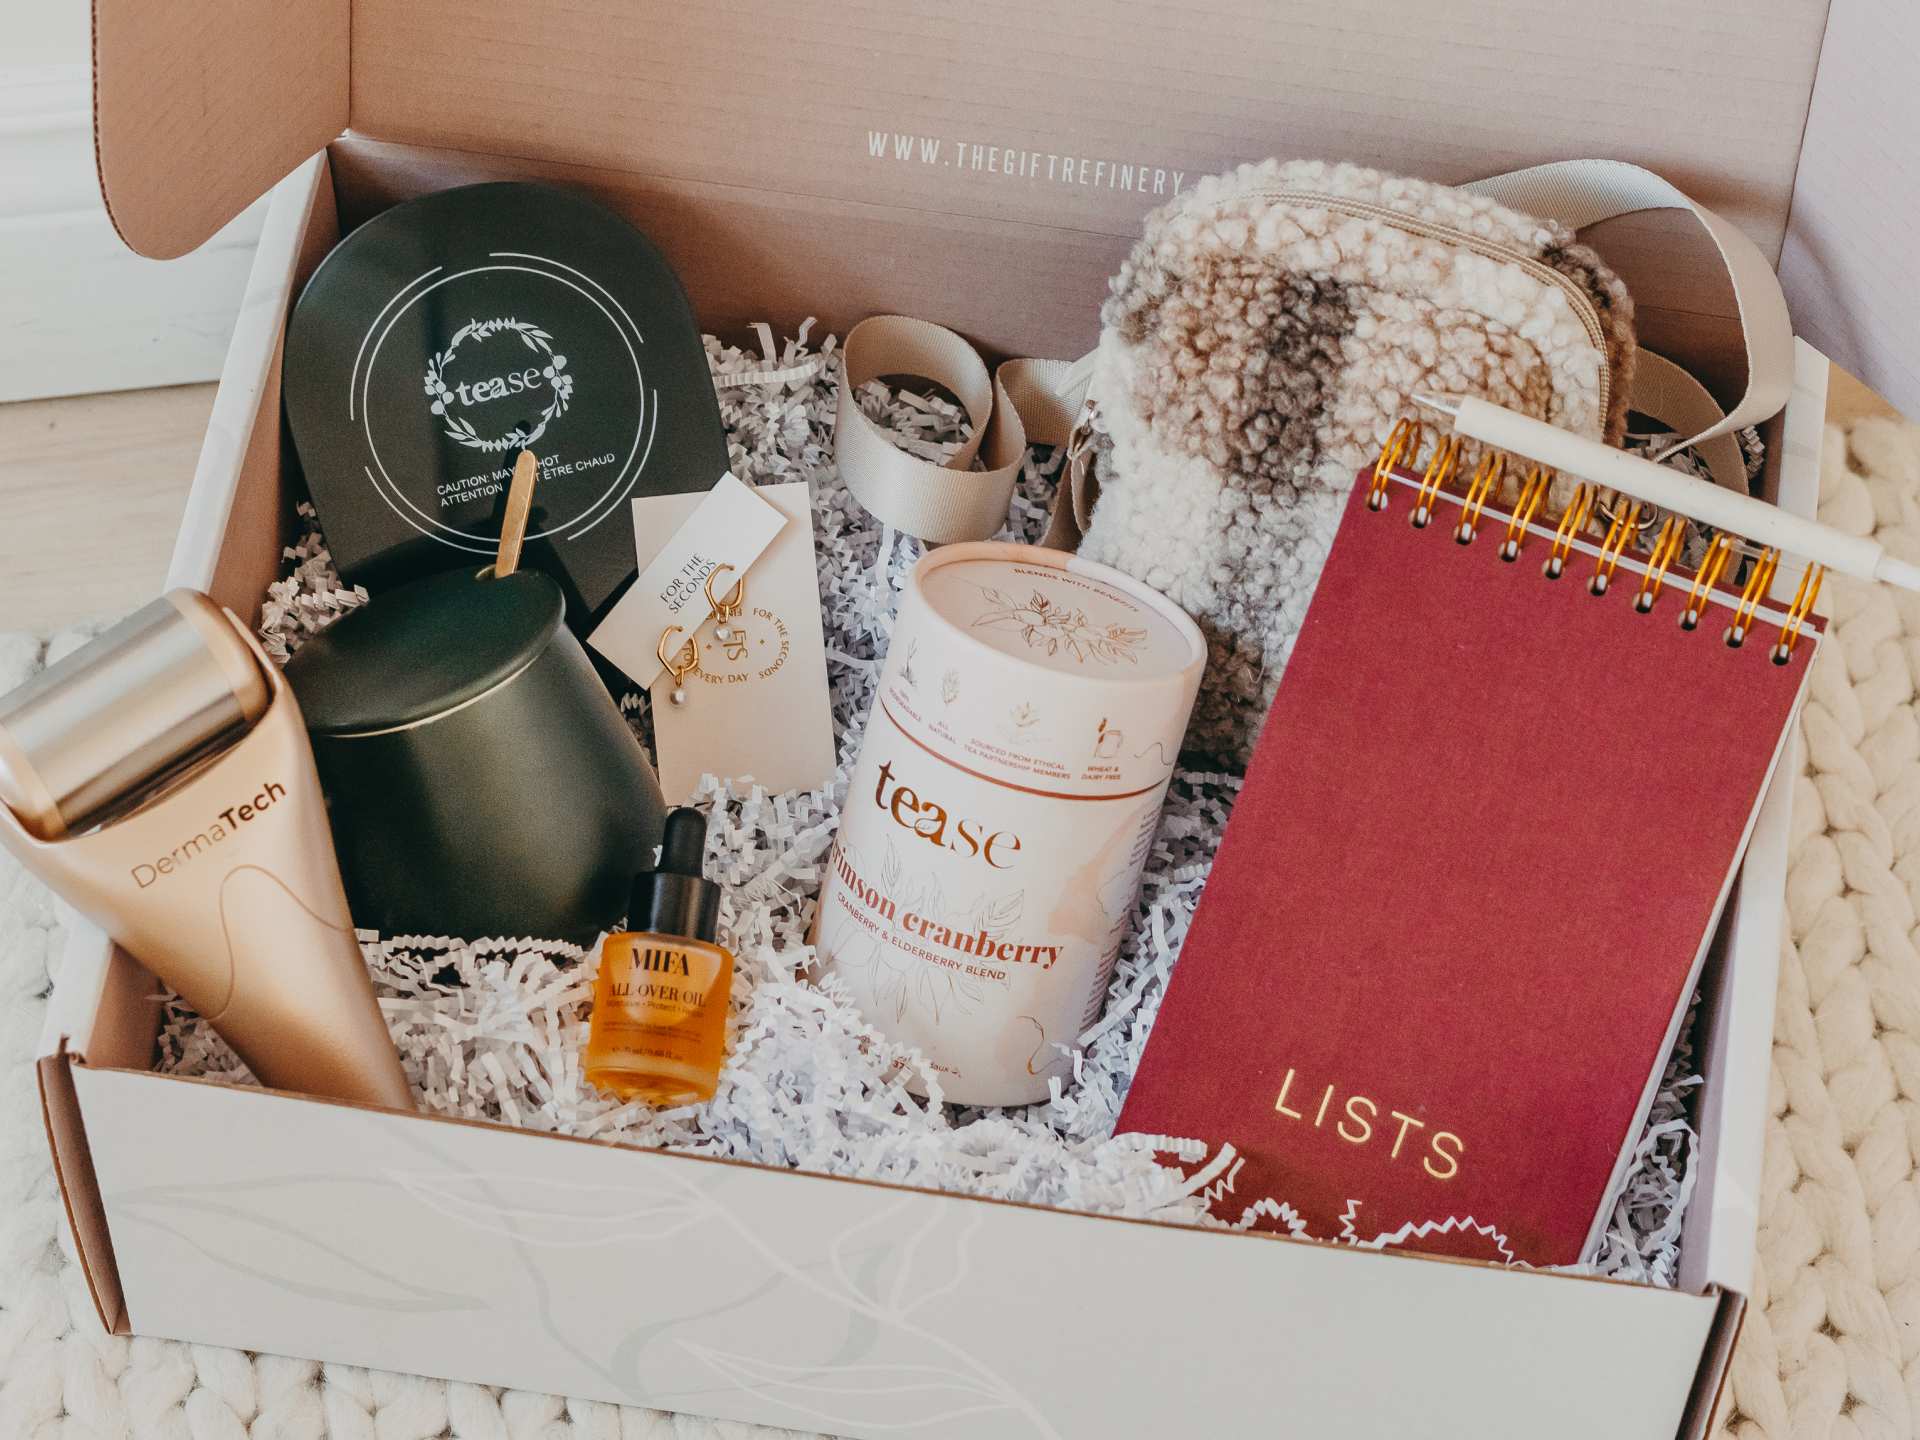 Canadian gift boxes | The Gift Refinery Hello Winter Box